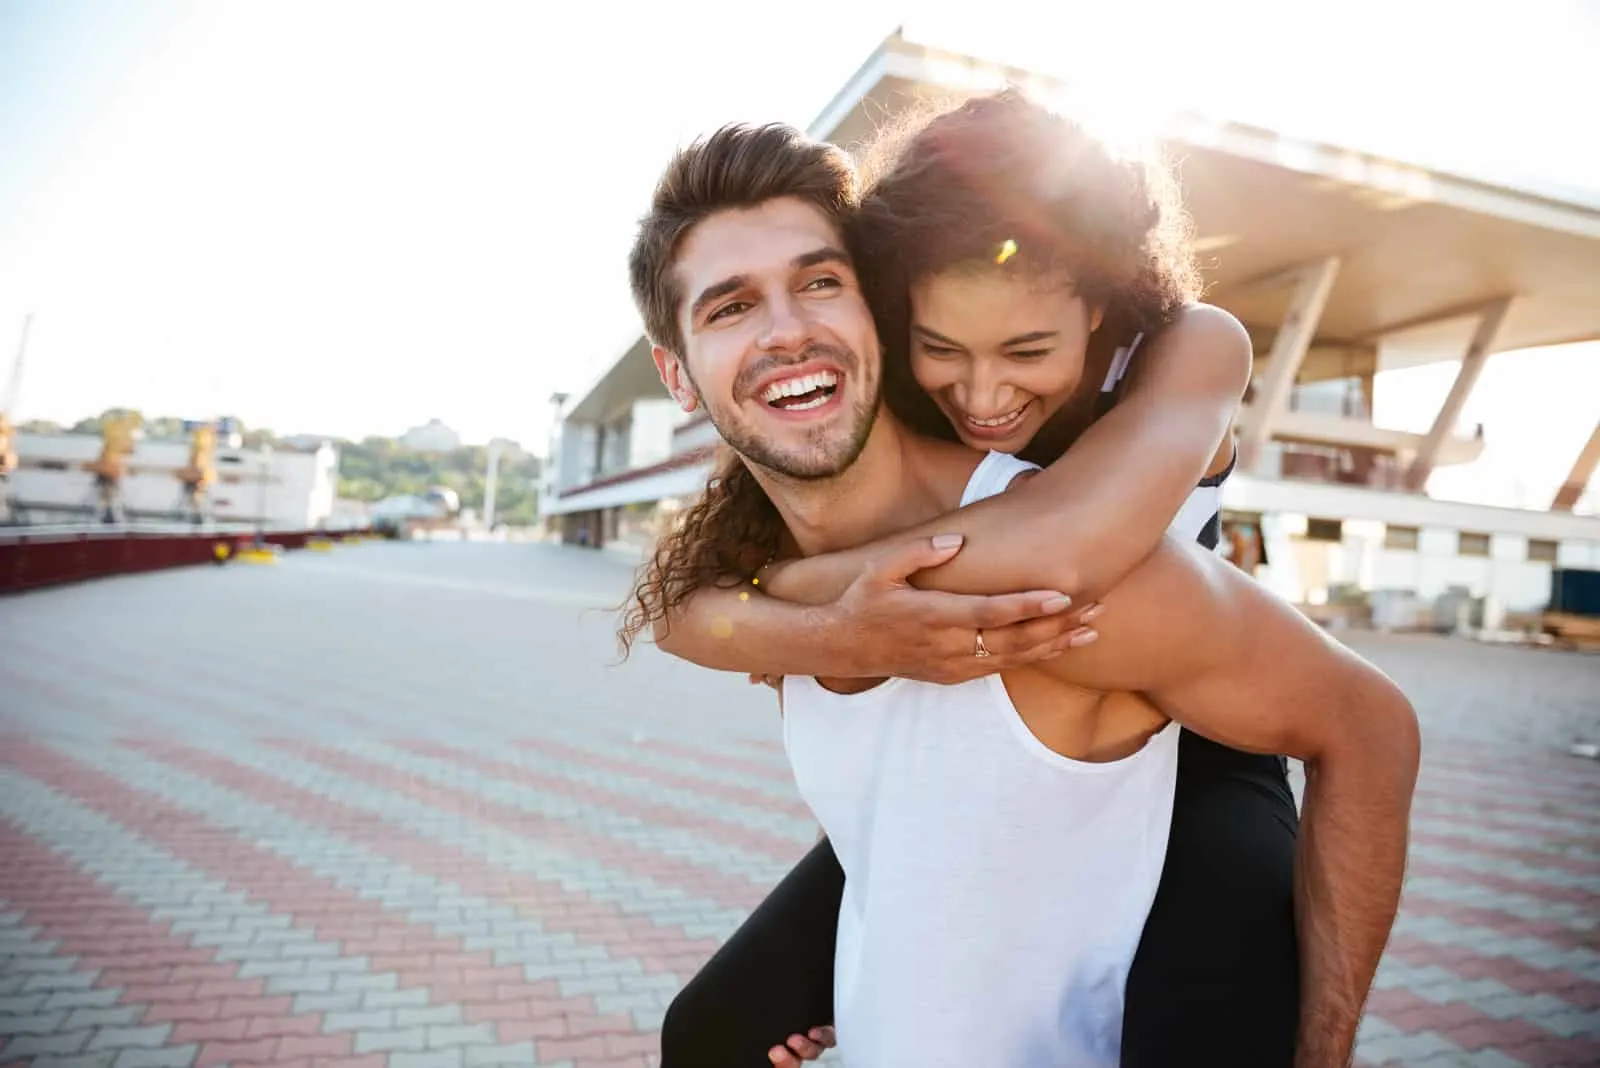 smiling man carrying his girlfriend on his back